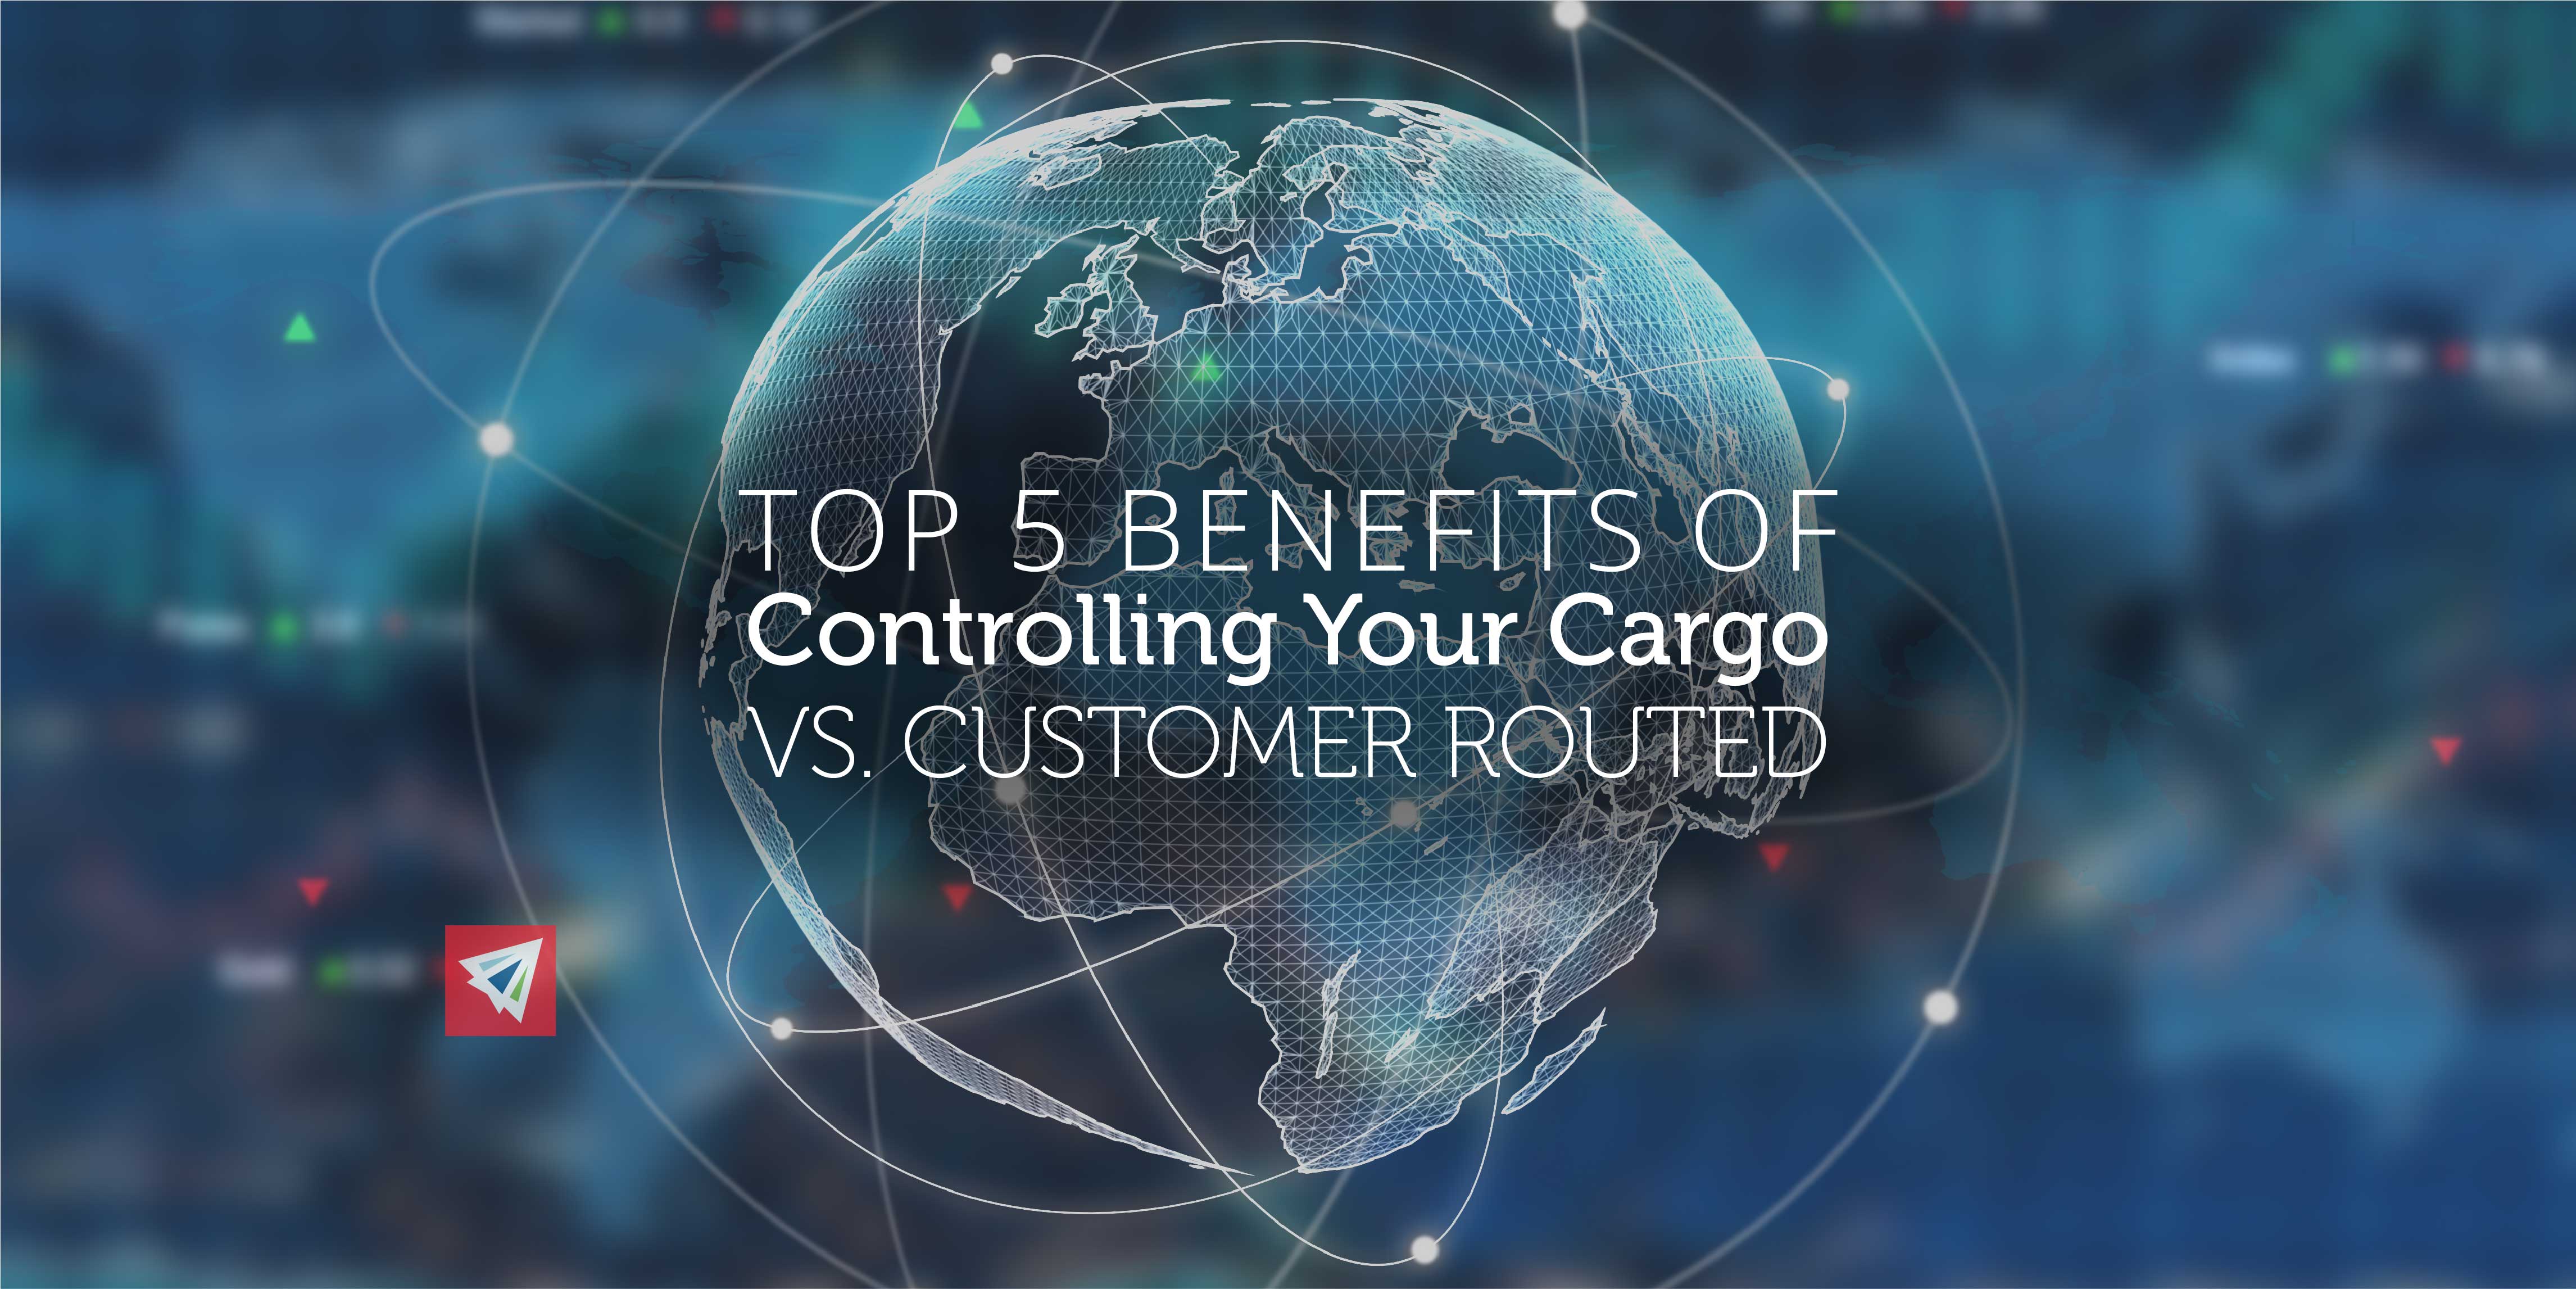 Top 5 Benefits of Controlling Your Cargo vs. Customer Routed